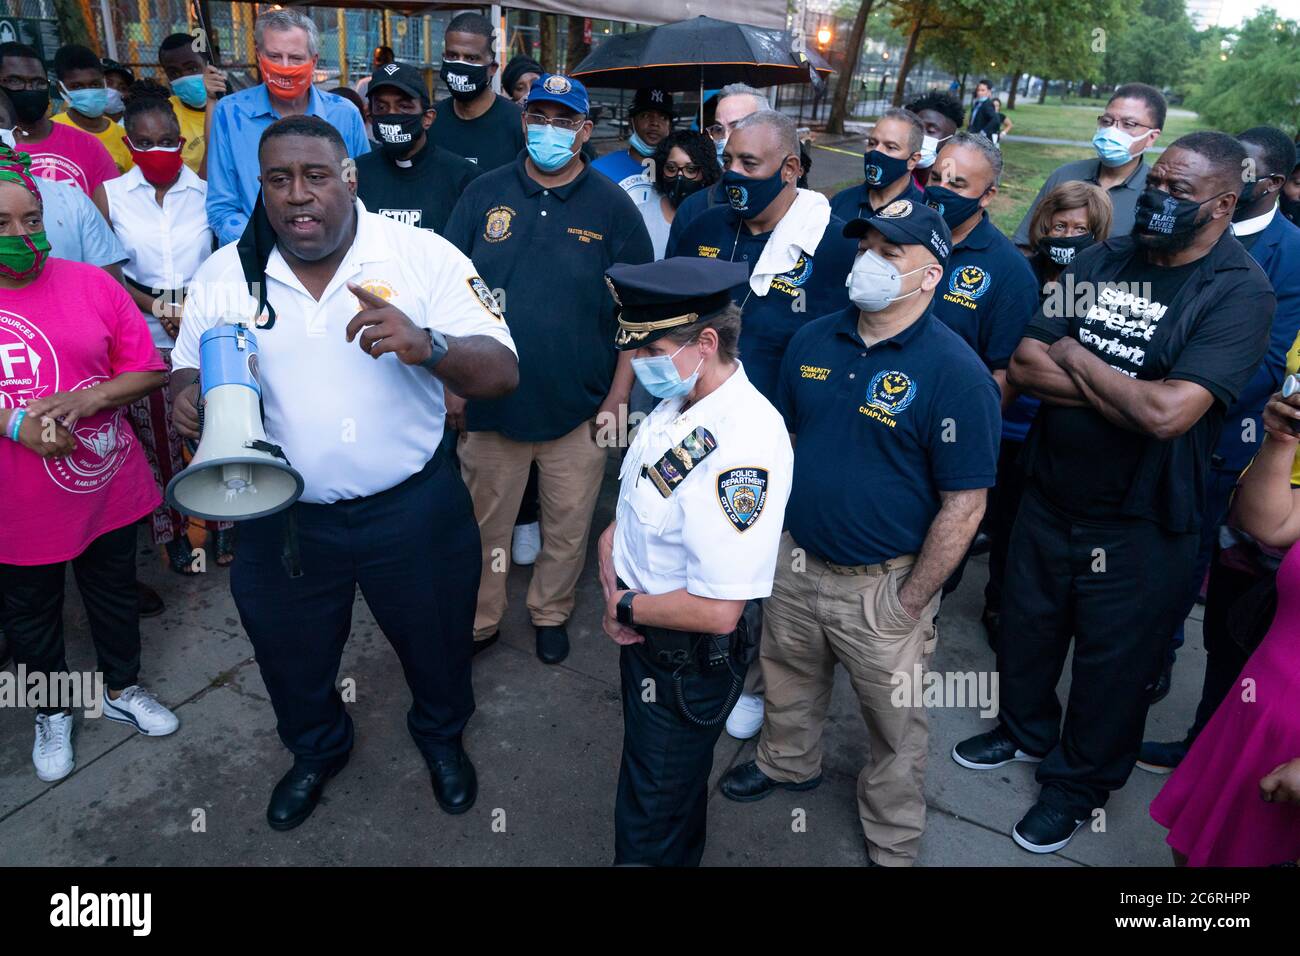 New York, NY - July 11, 2020: NYPD Chief Jeffrey Maddrey speaks at Occupy the Corner rally in East Harlem in response on gun violence Stock Photo